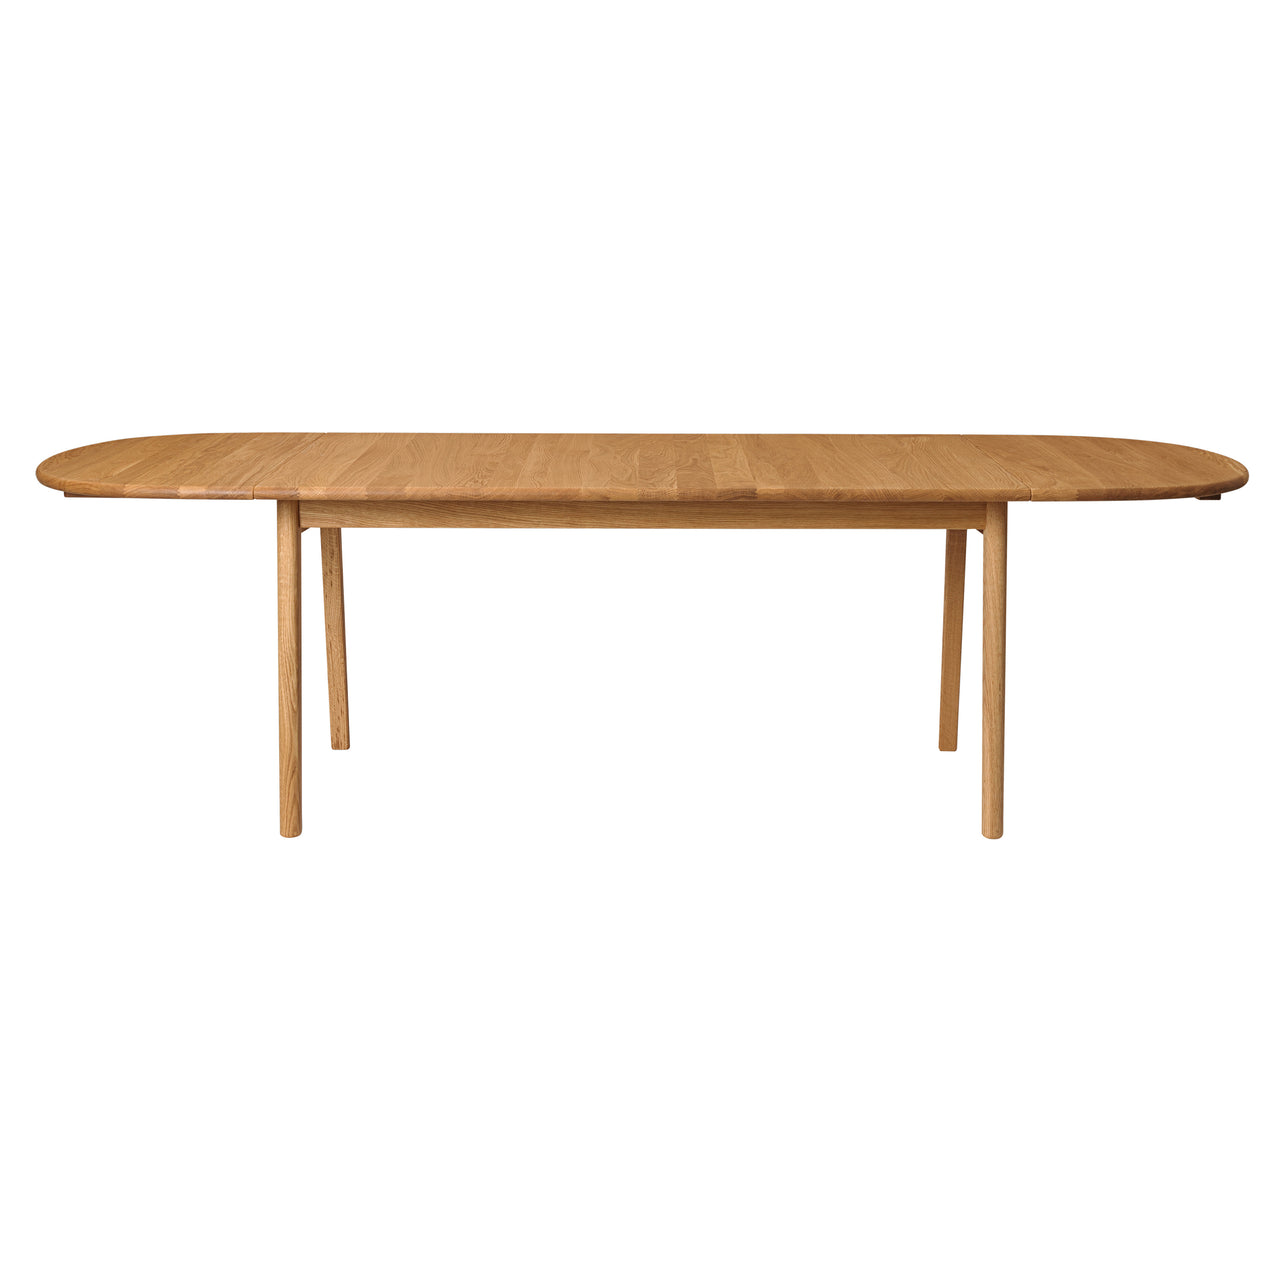 CH006 Dining Table: Oiled Oak